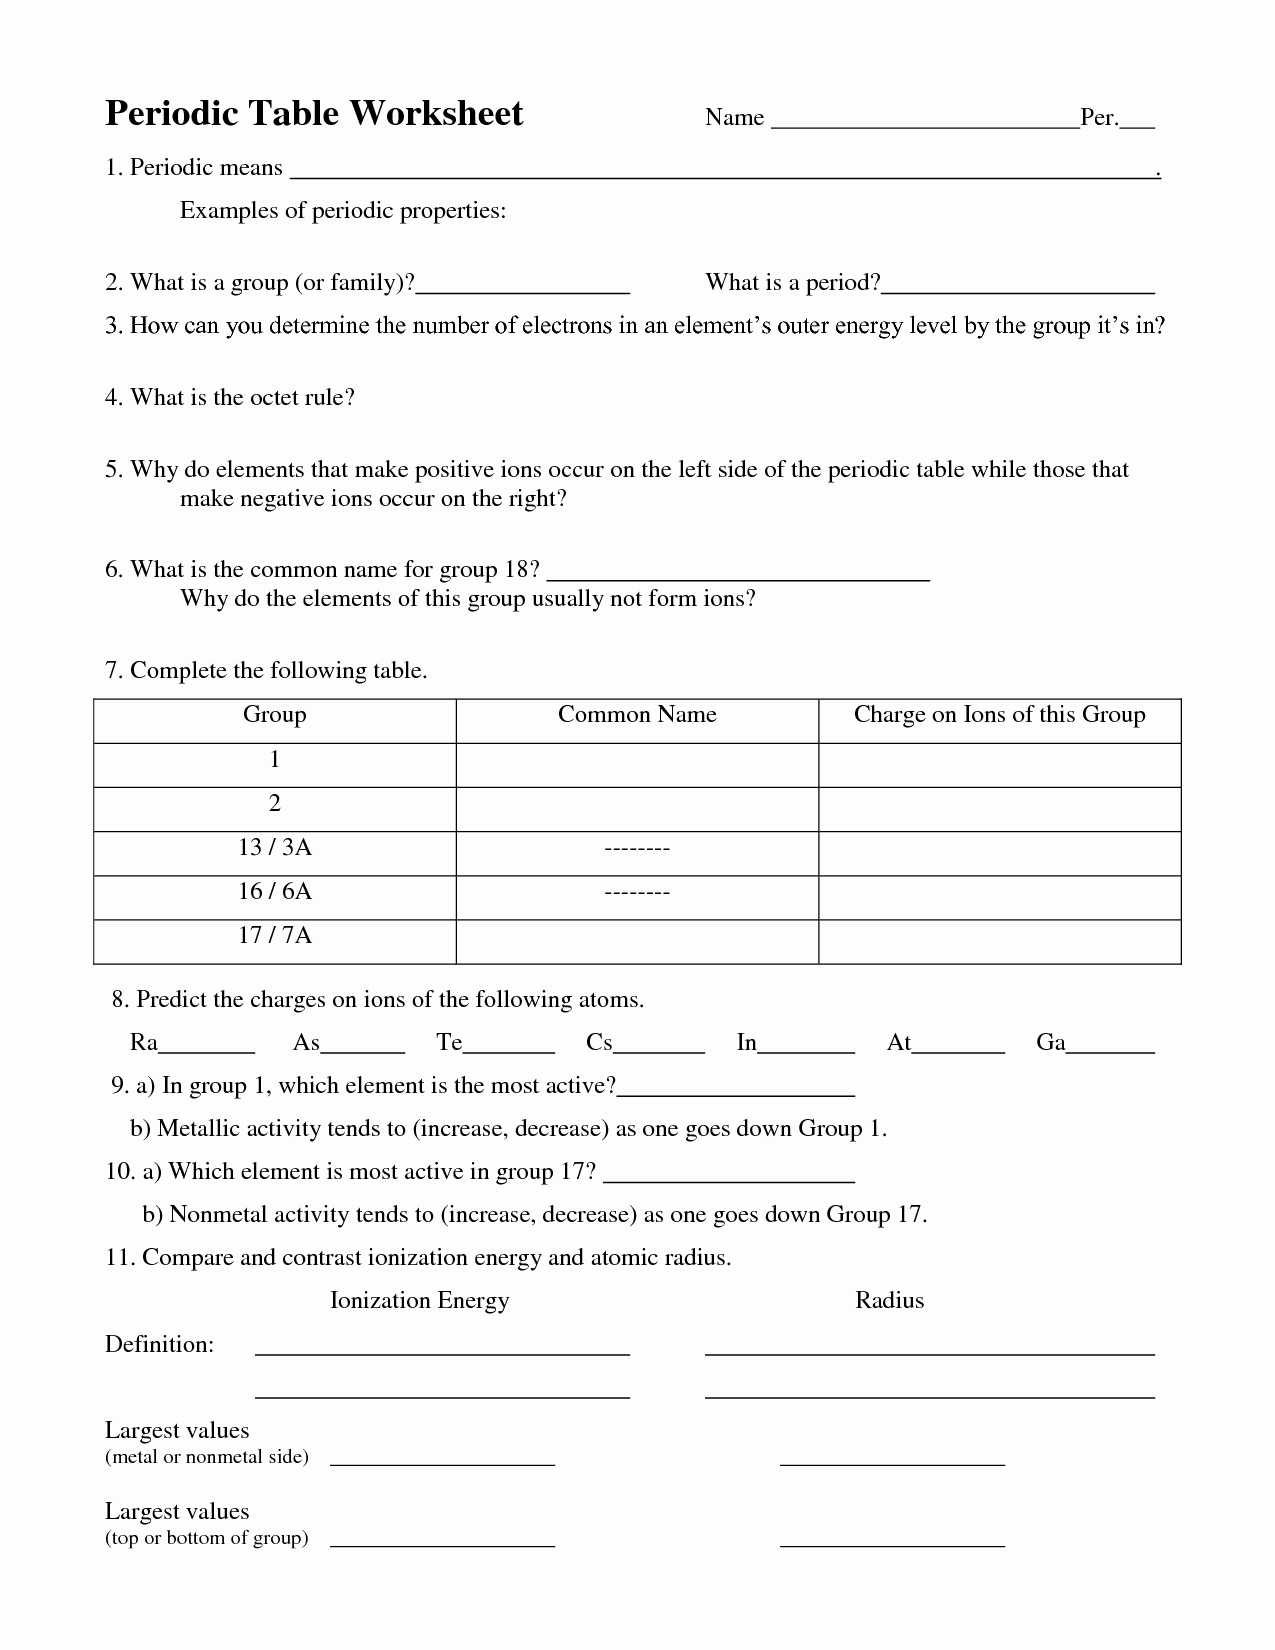 Transcription Worksheet Answer Key together with Pearson Education Worksheet Answers Beautiful Biology Worksheet